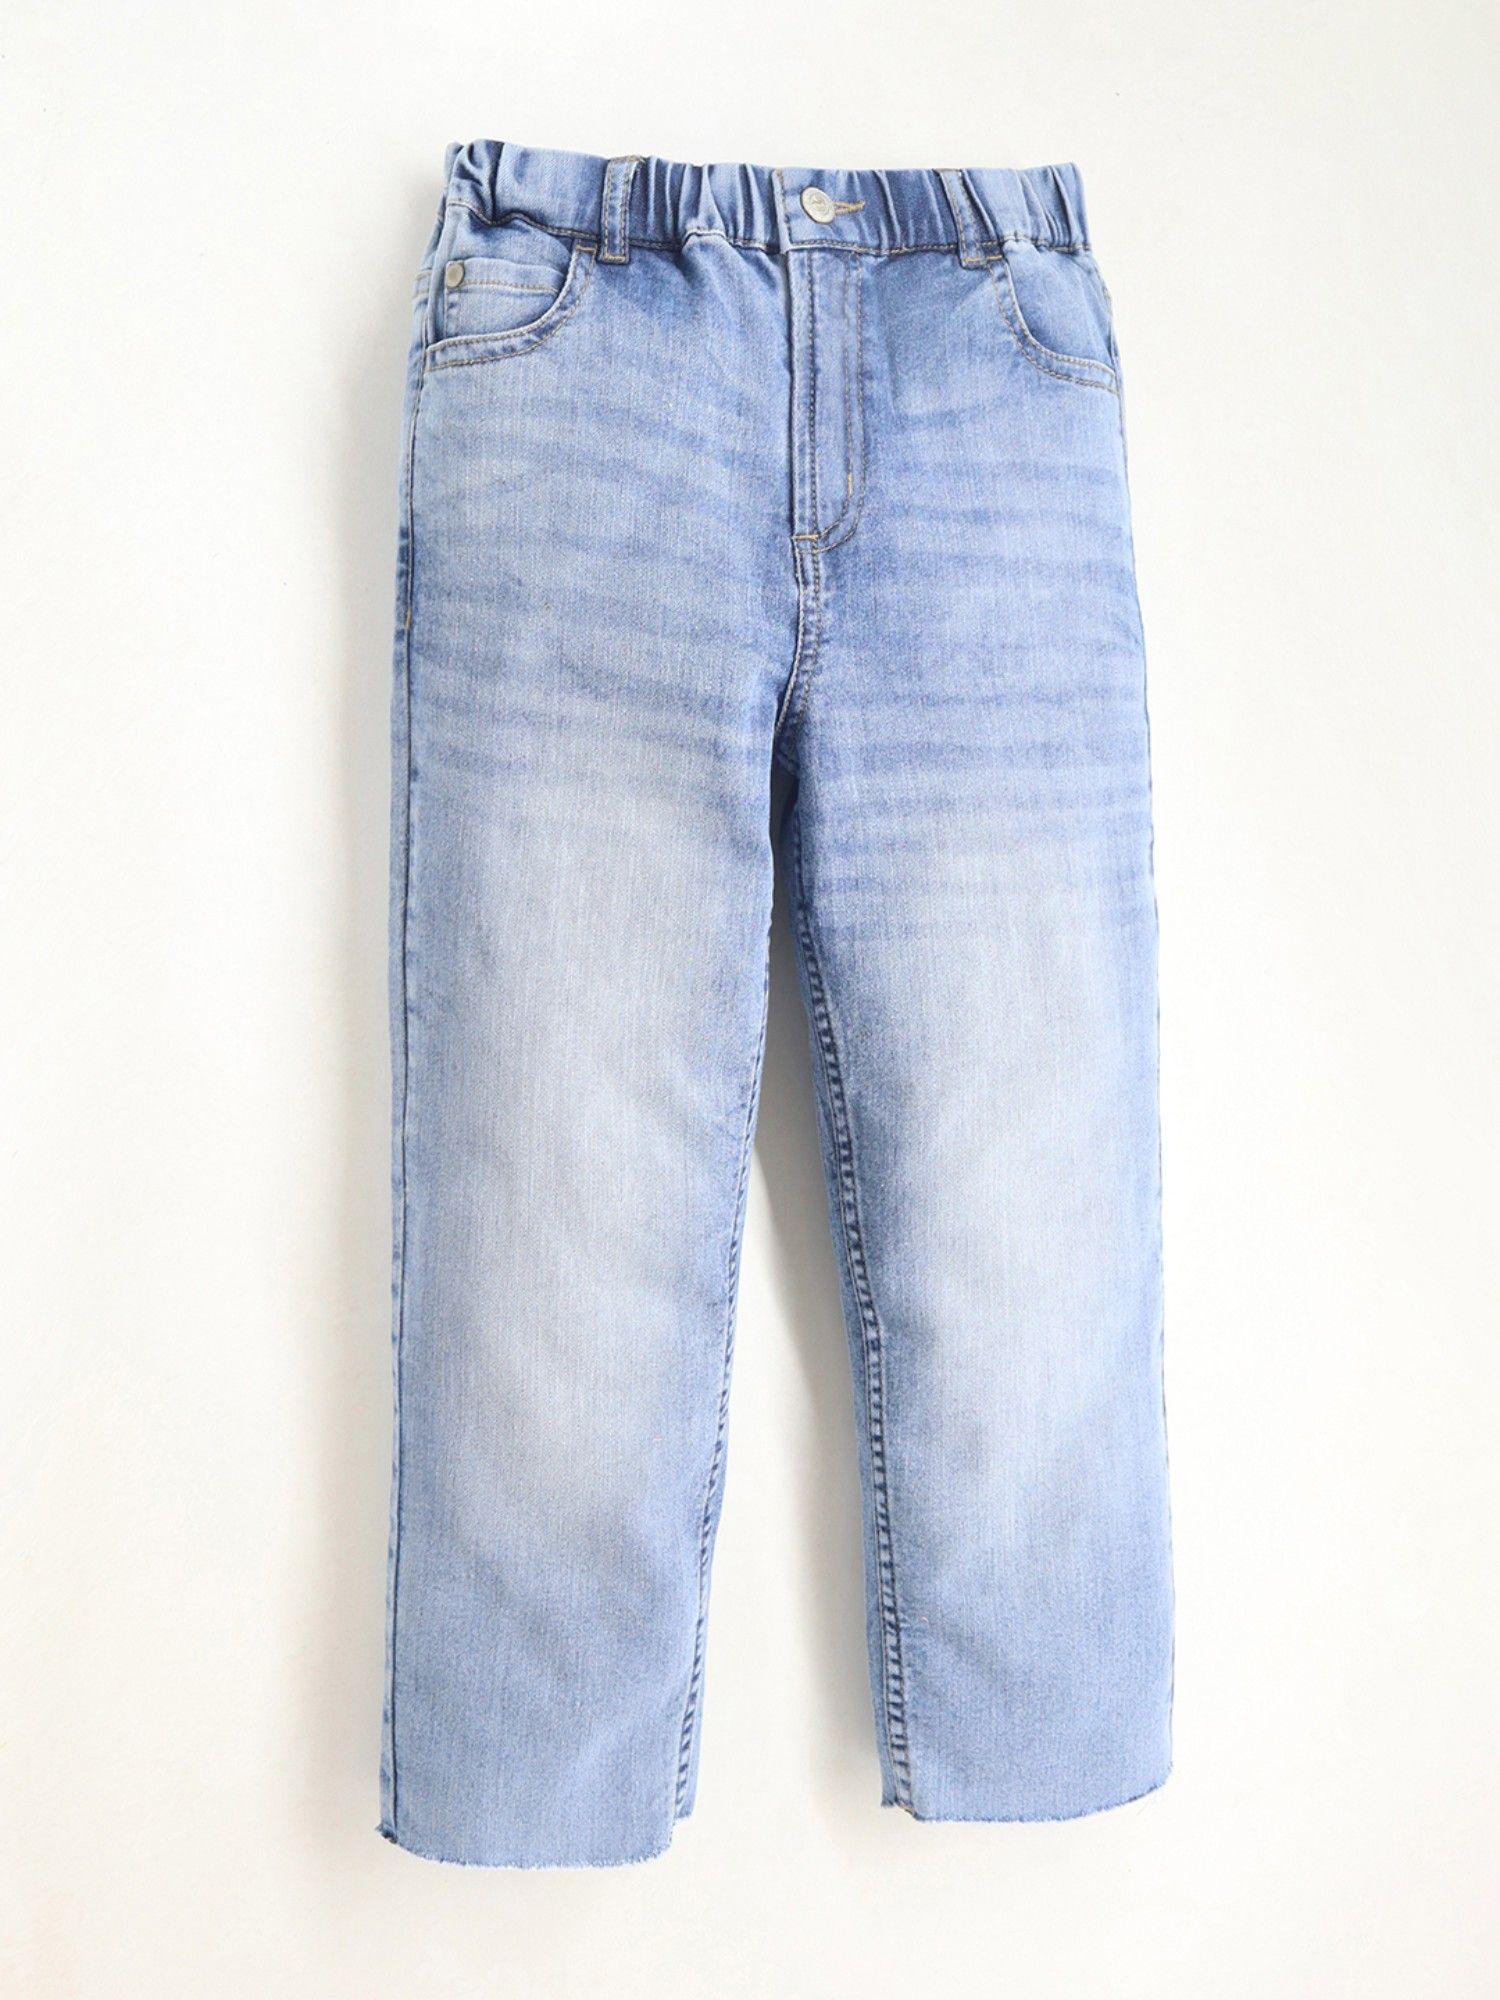 classic denim blue jeans with straight fit